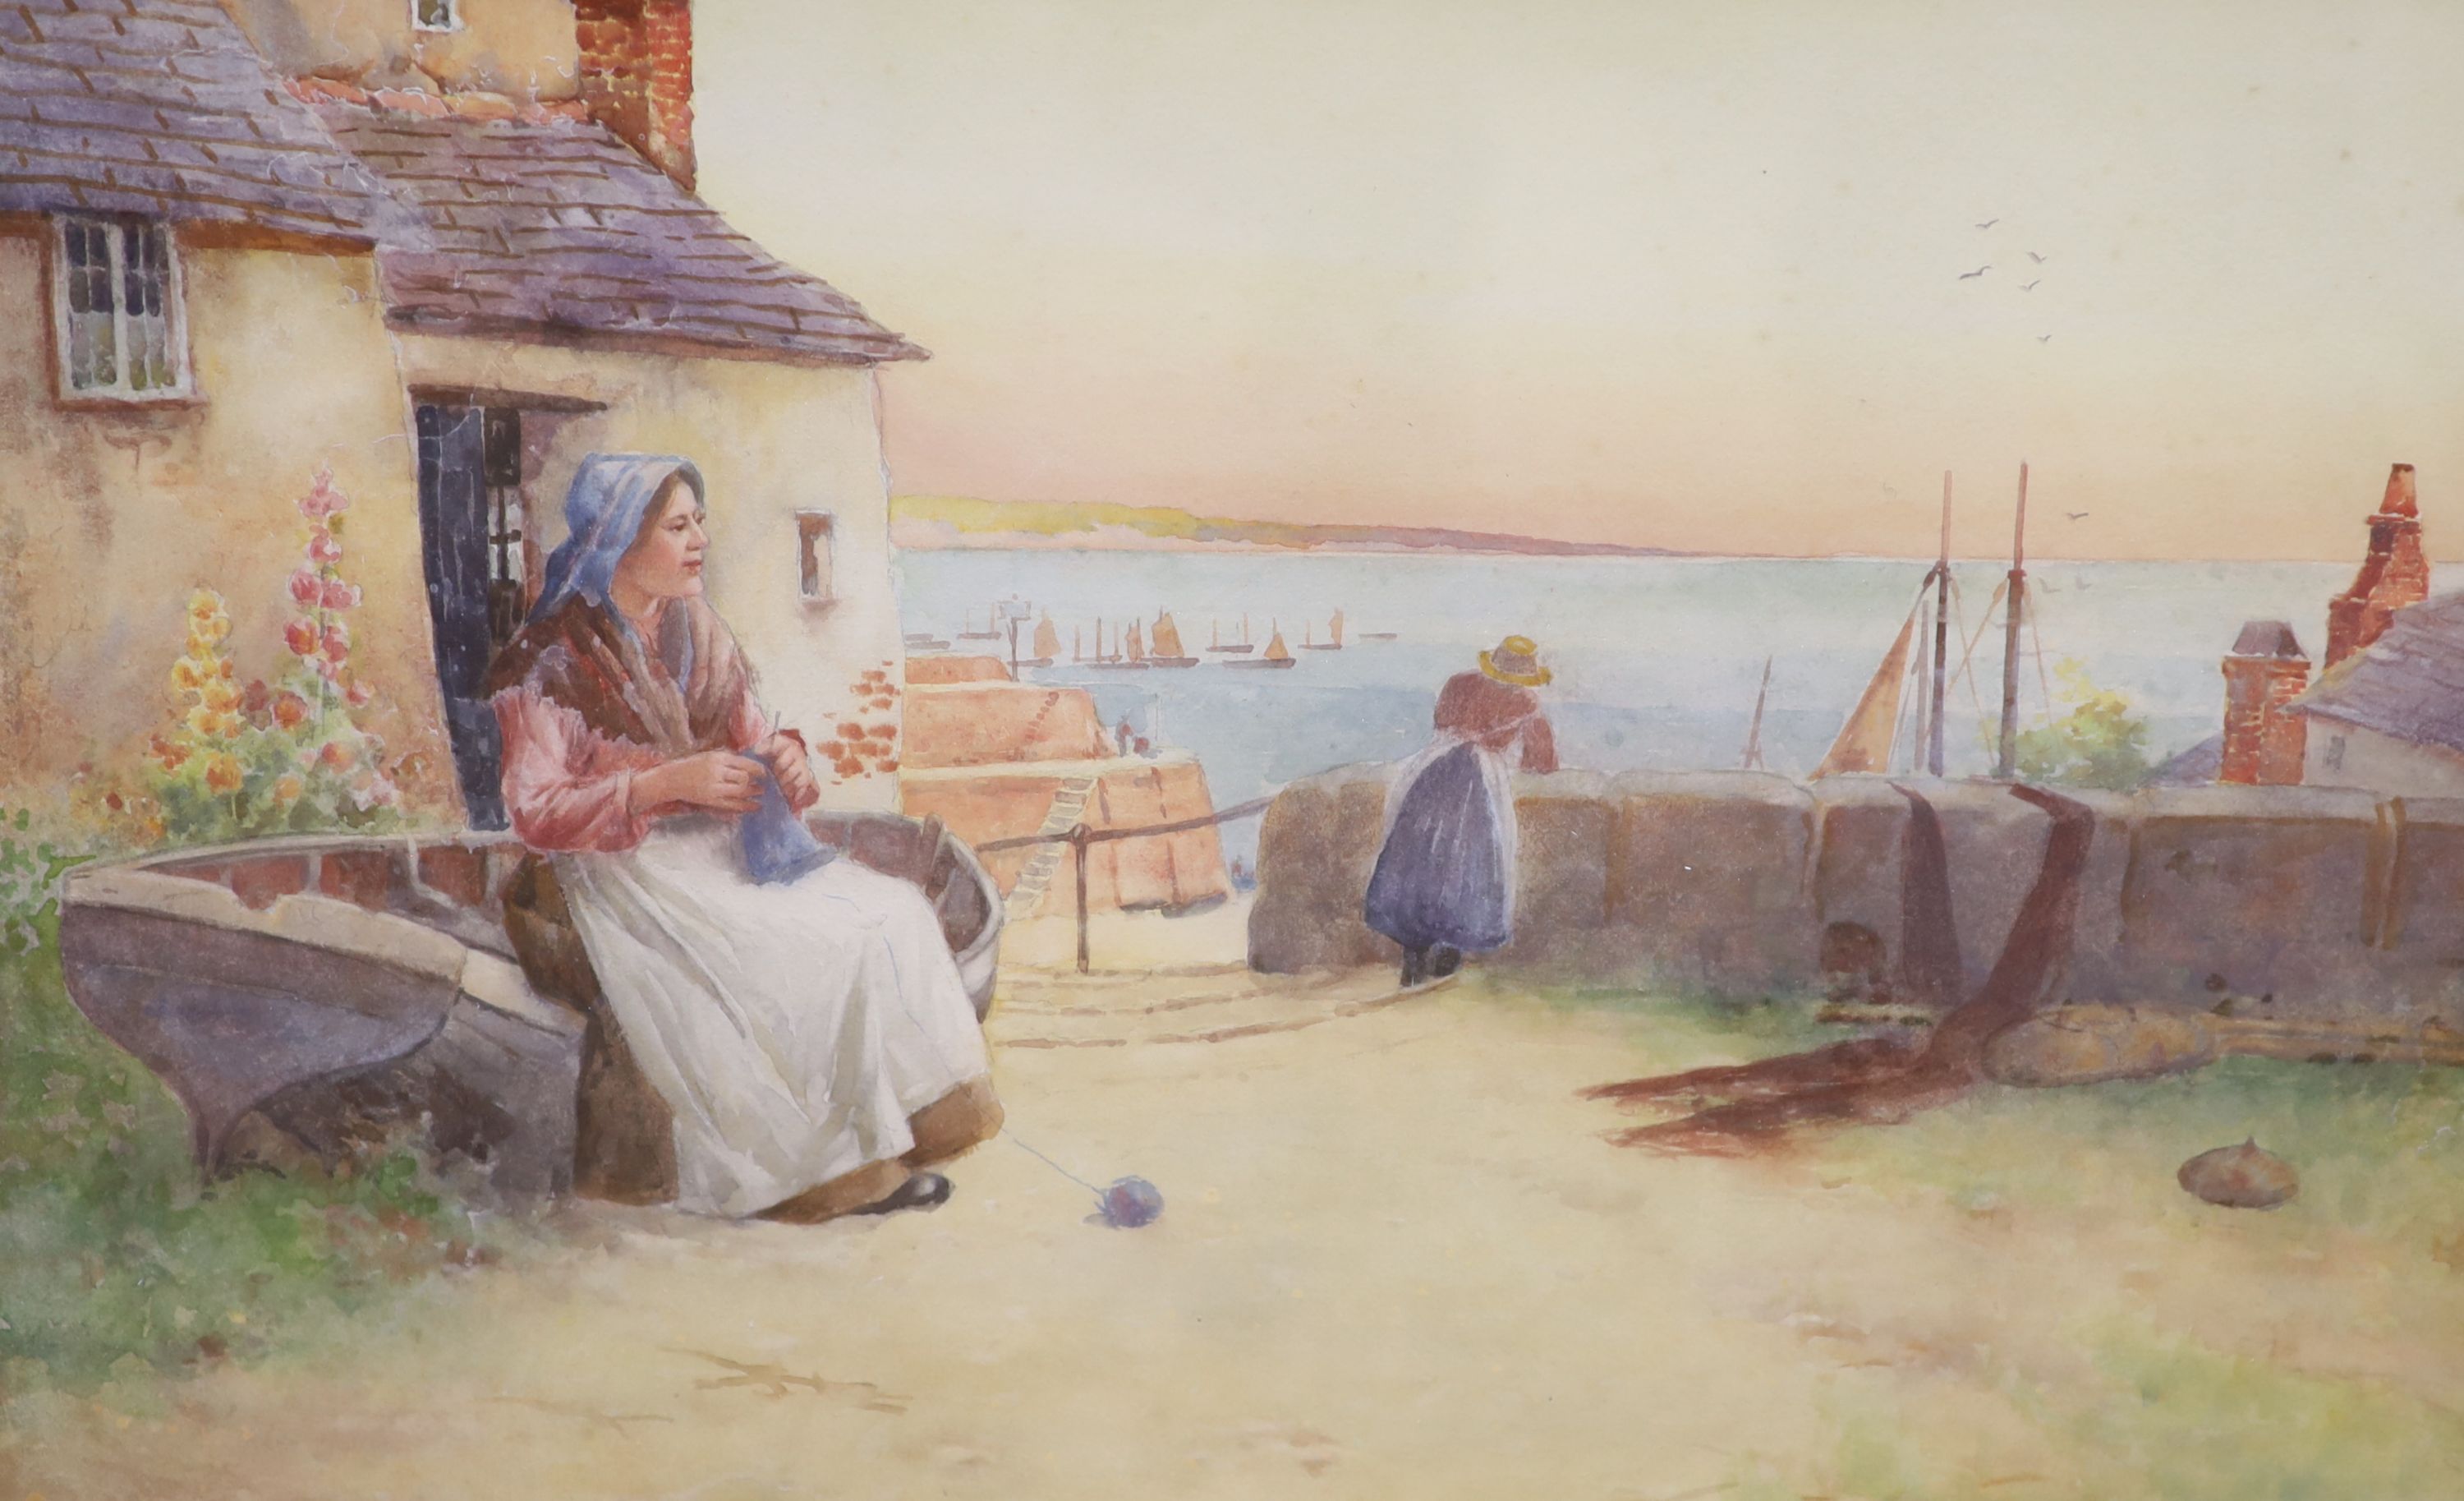 H. English (fl.1890-1920), watercolour, 'Departing Day', signed and dated 1902, 28 x 43cm